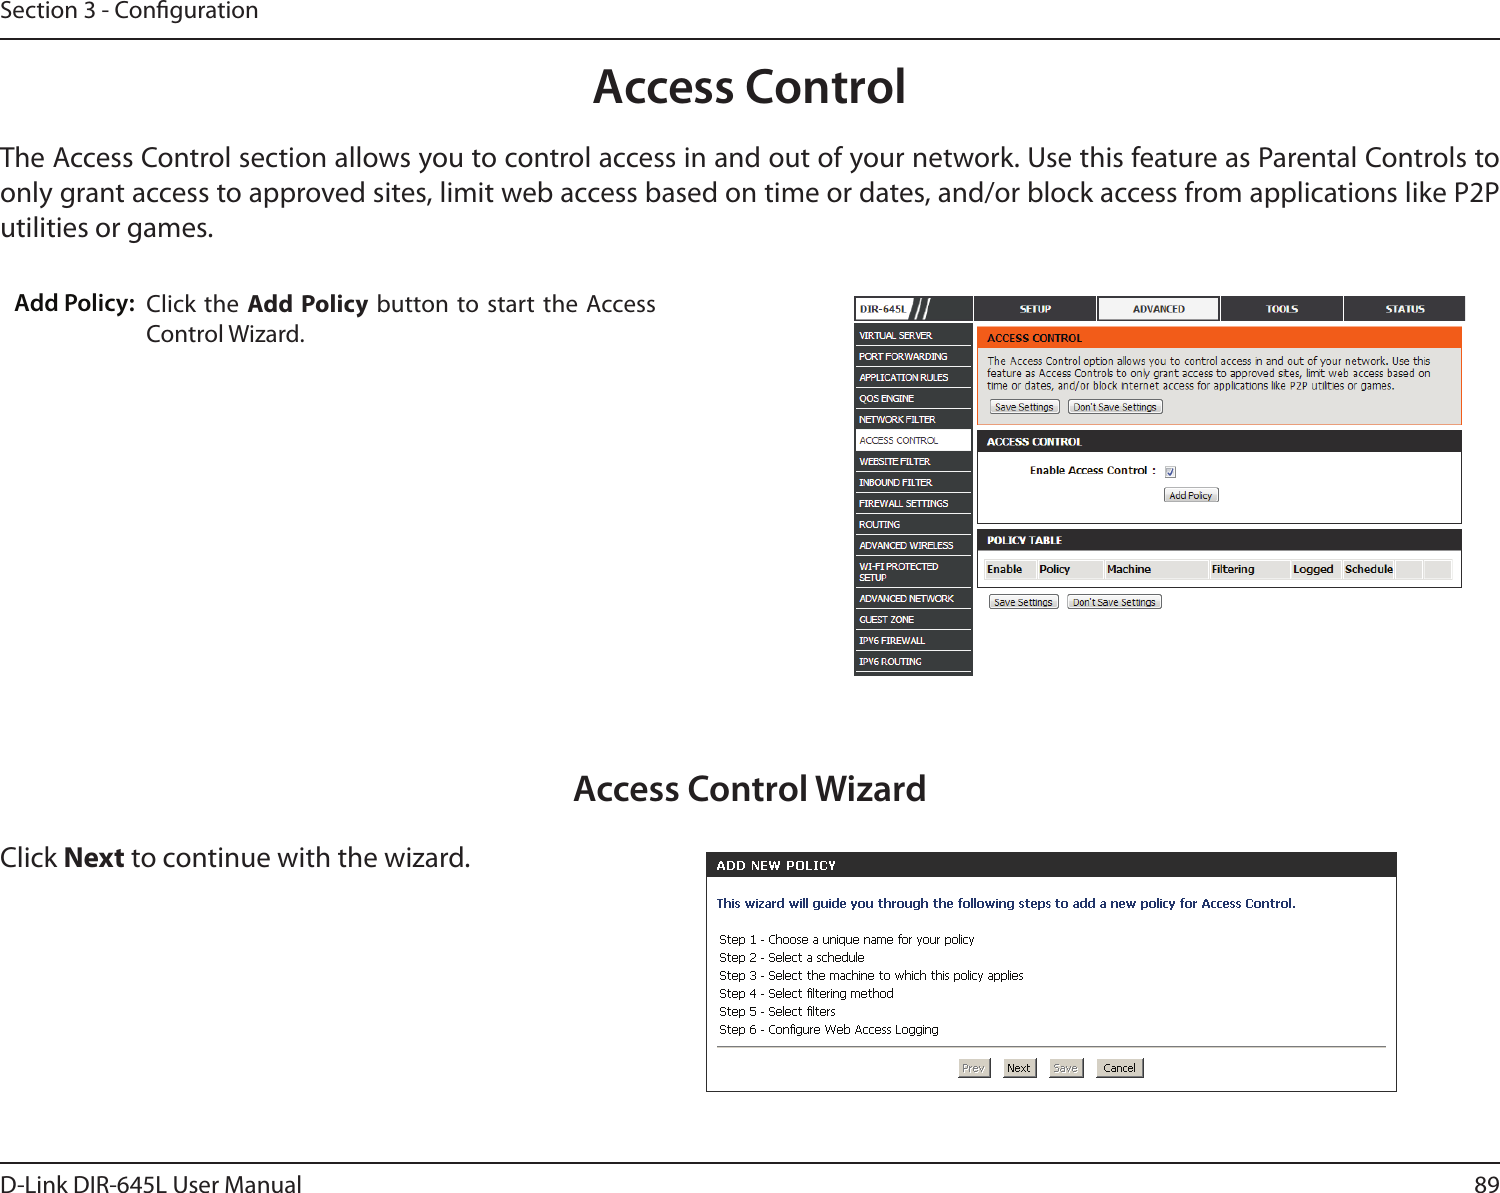 89D-Link DIR-645L User ManualSection 3 - CongurationAccess ControlClick the  Add Policy button  to start the  Access Control Wizard. Add Policy:The Access Control section allows you to control access in and out of your network. Use this feature as Parental Controls to only grant access to approved sites, limit web access based on time or dates, and/or block access from applications like P2P utilities or games.Click Next to continue with the wizard.Access Control Wizard